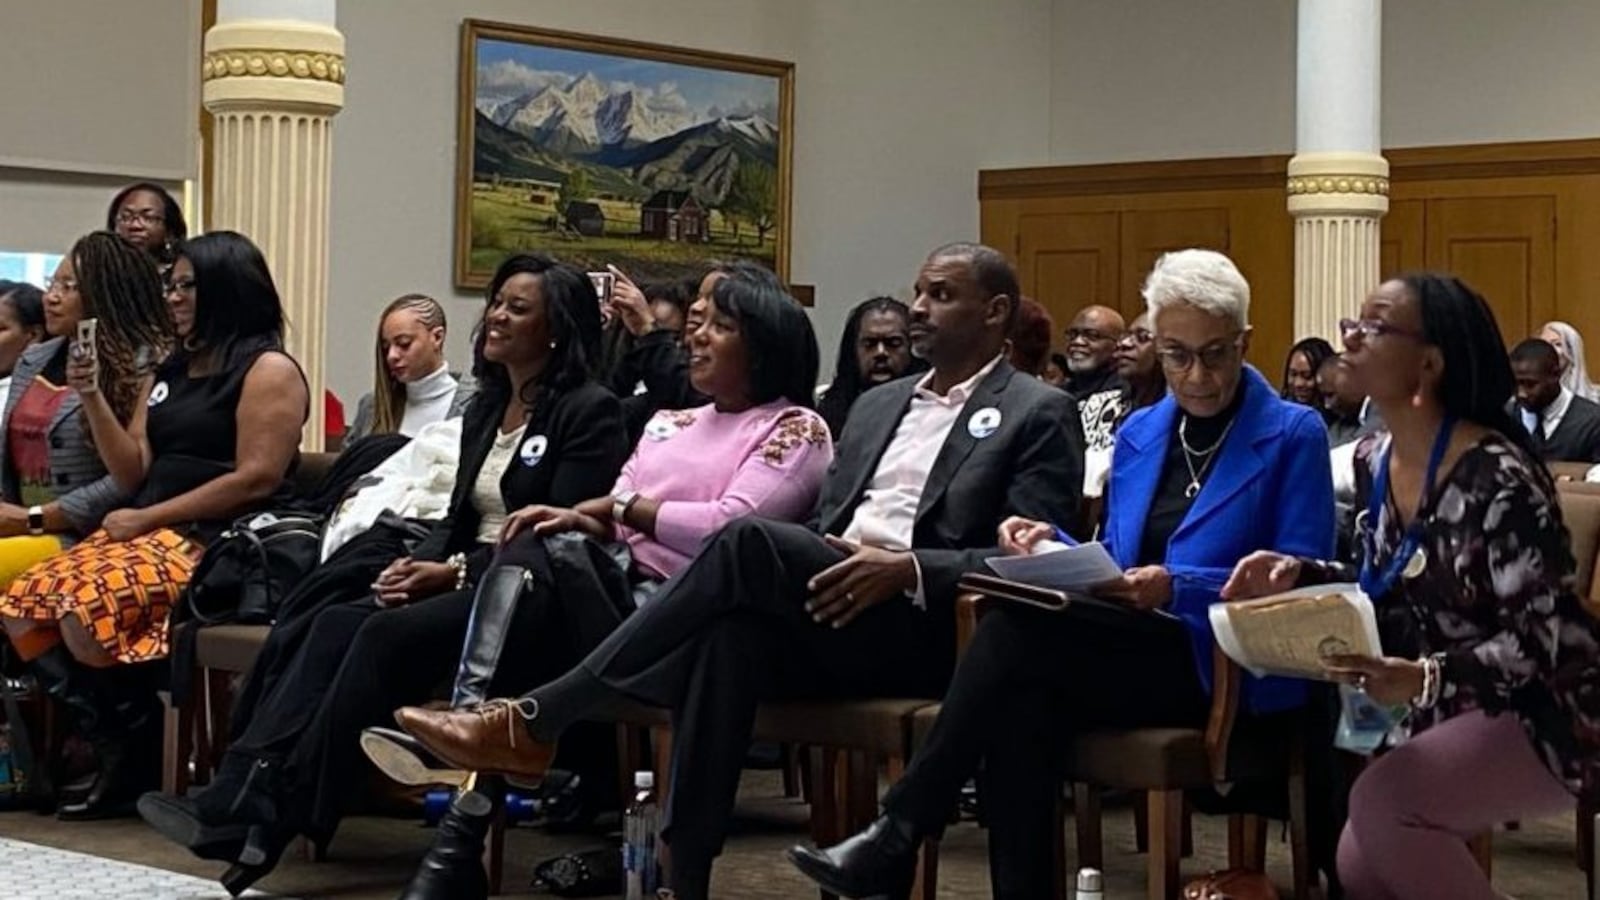 Community members and civic leaders wait to testify in support of the Colorado Crown Act, which would ban discrimination against natural hairstyles at work and in school.